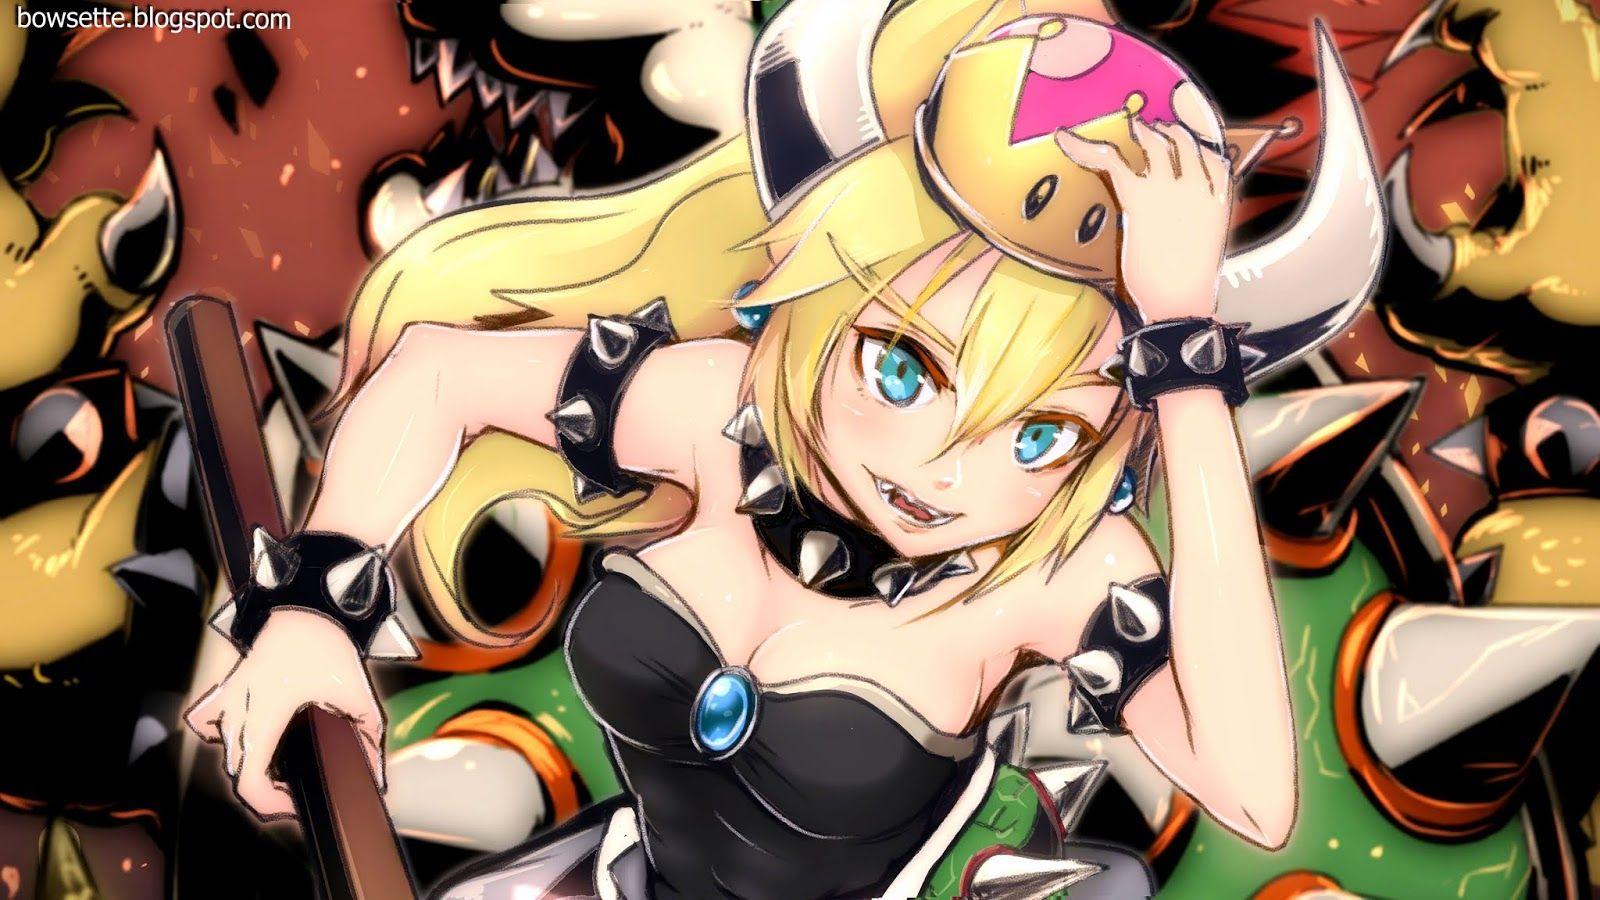 Bowsette wallpapers 4k for pc users.